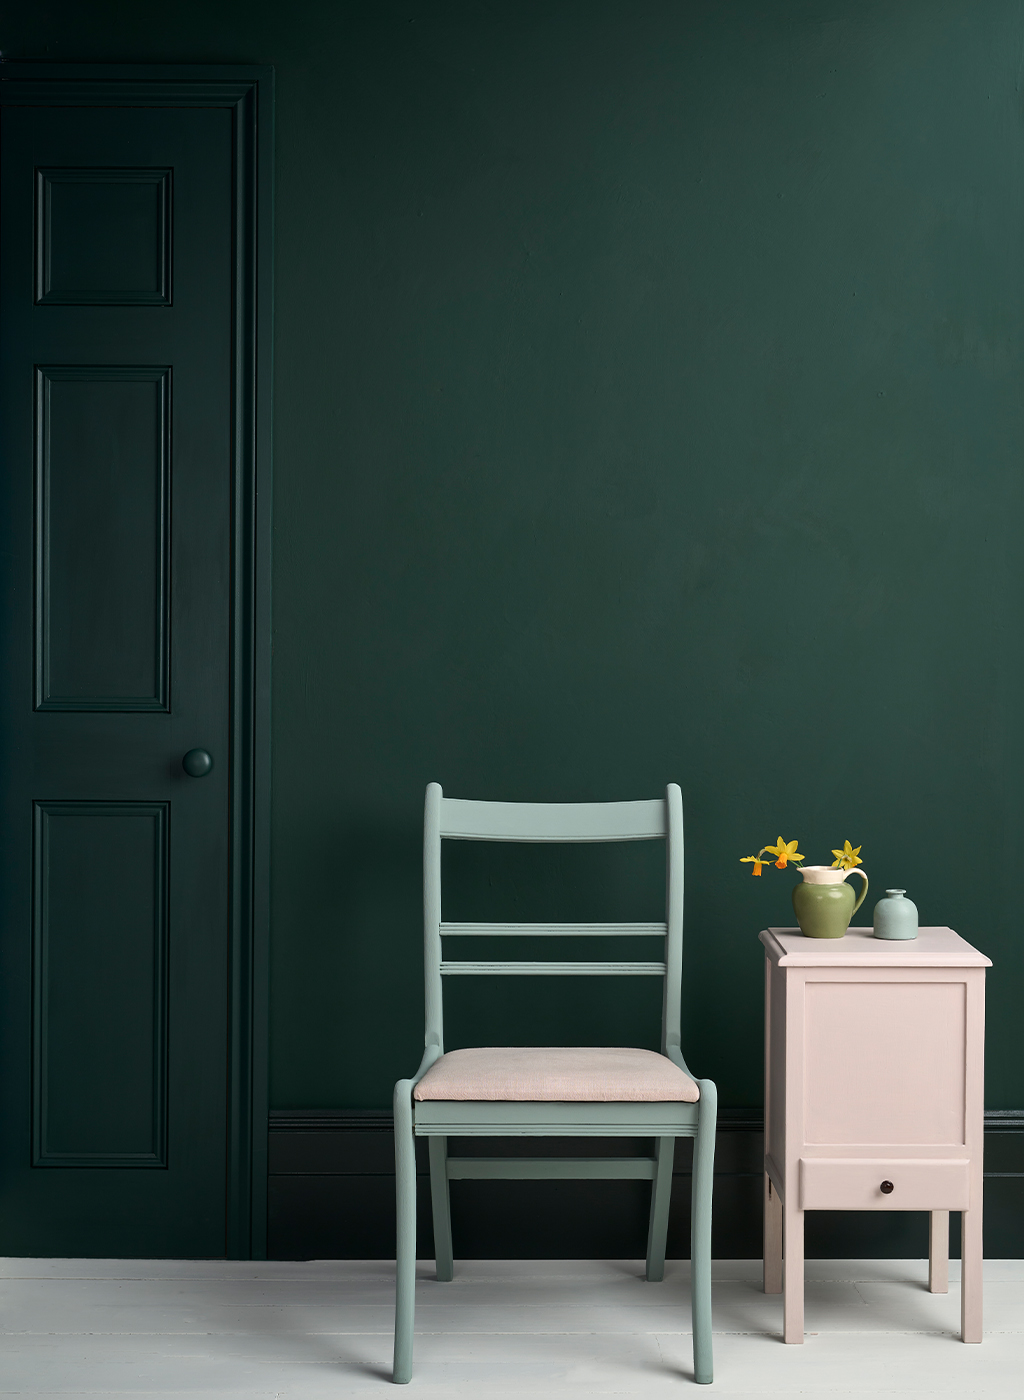 Lifestyle Image of Annie Sloan Satin Paint in Knightsbridge Green used on door and skirting